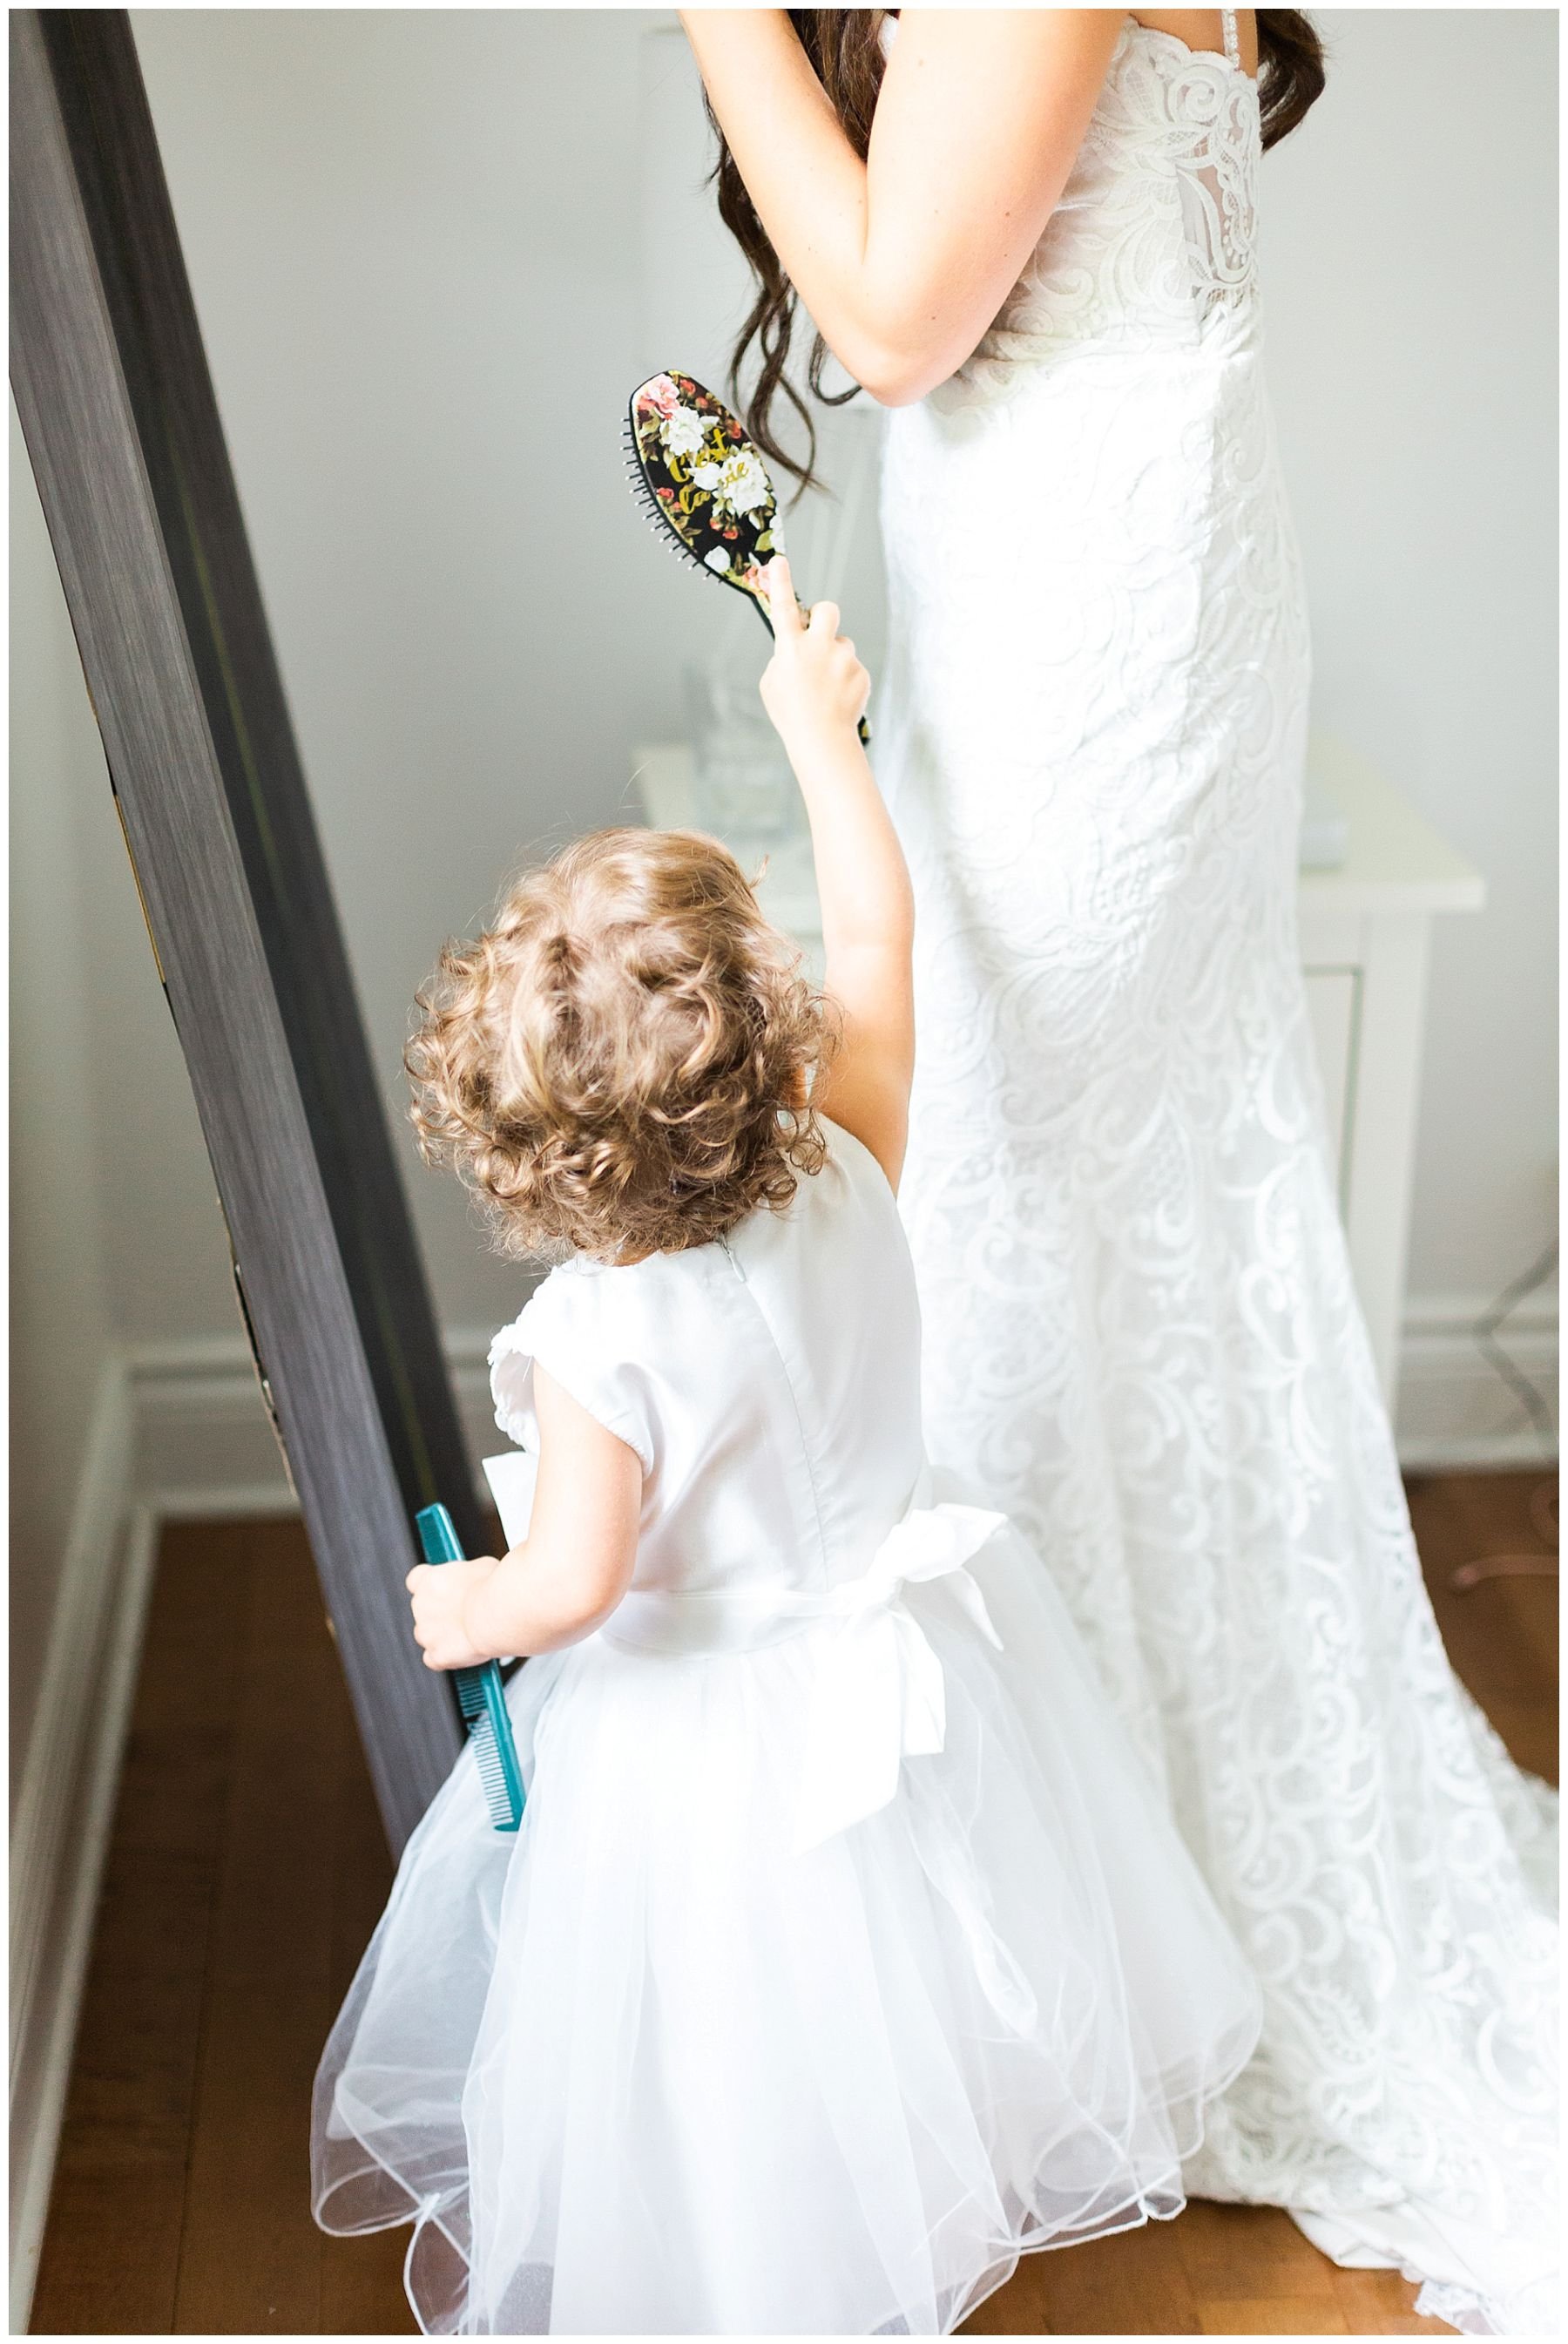 cute flower girl moment with the bride